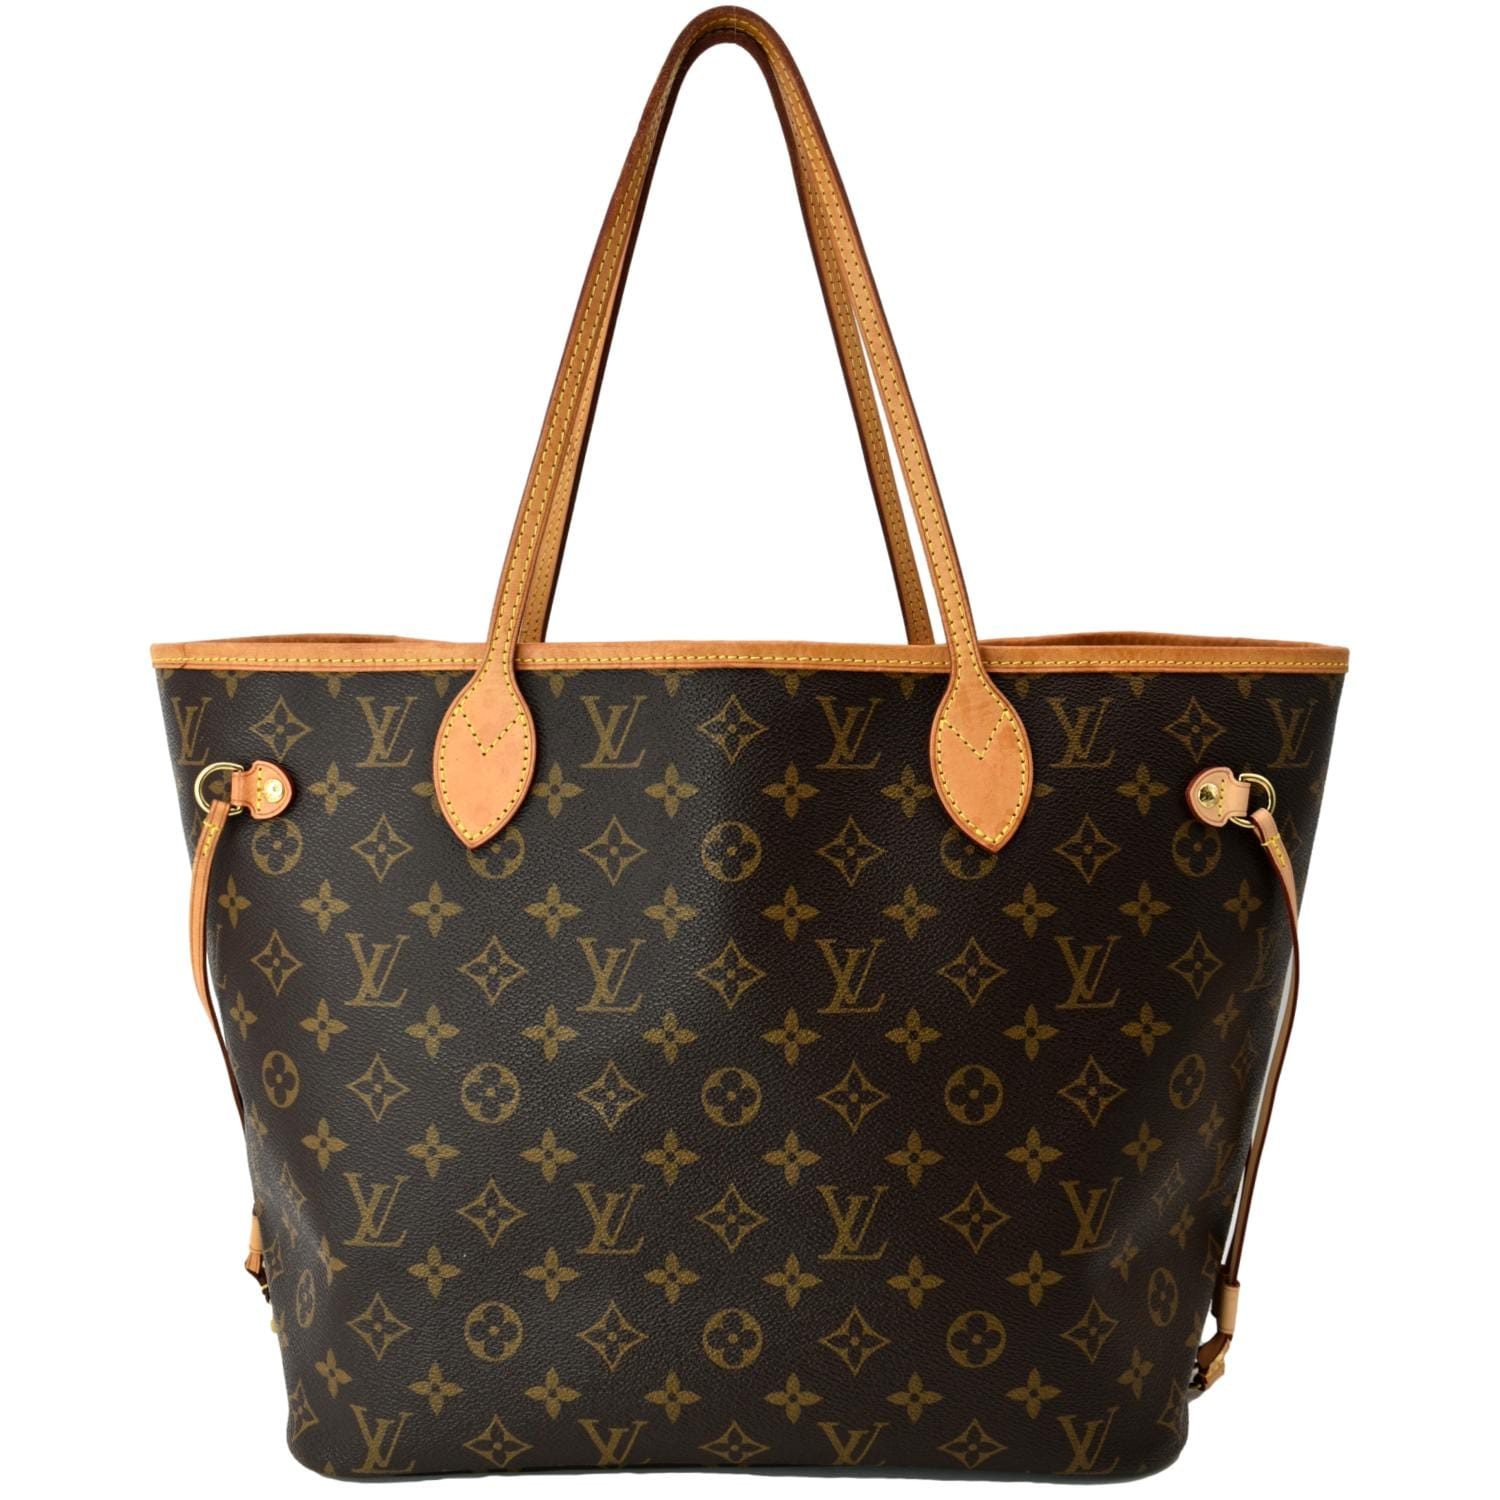 AVAILABLE NOW 🔥 PRELOVED Neverfull Monogram MM TOTE #tote